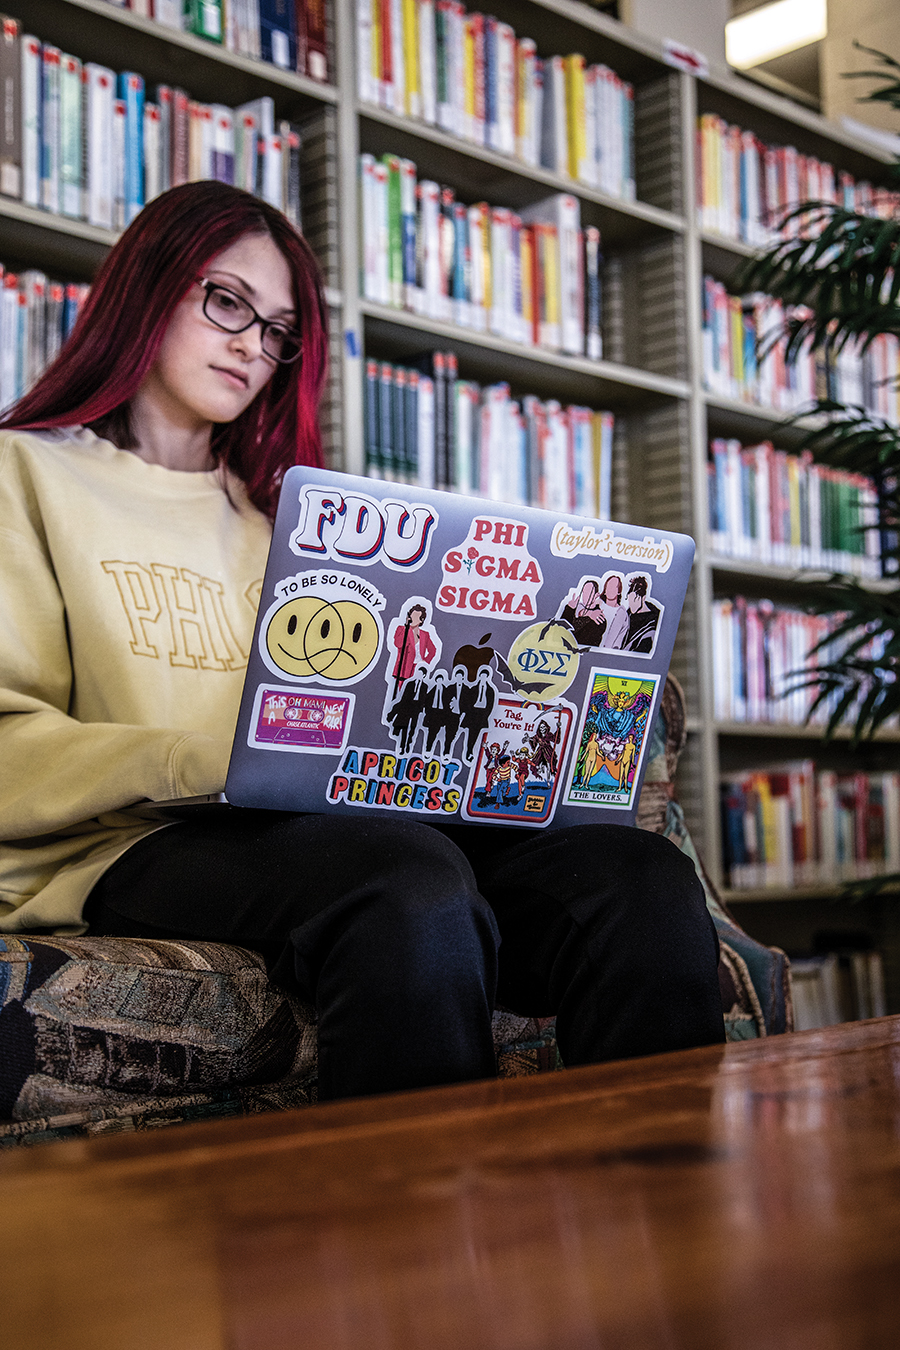 A young woman wearing glasses and sitting in the library, types on her laptop. The laptop has many colorful stickers on the exterior.